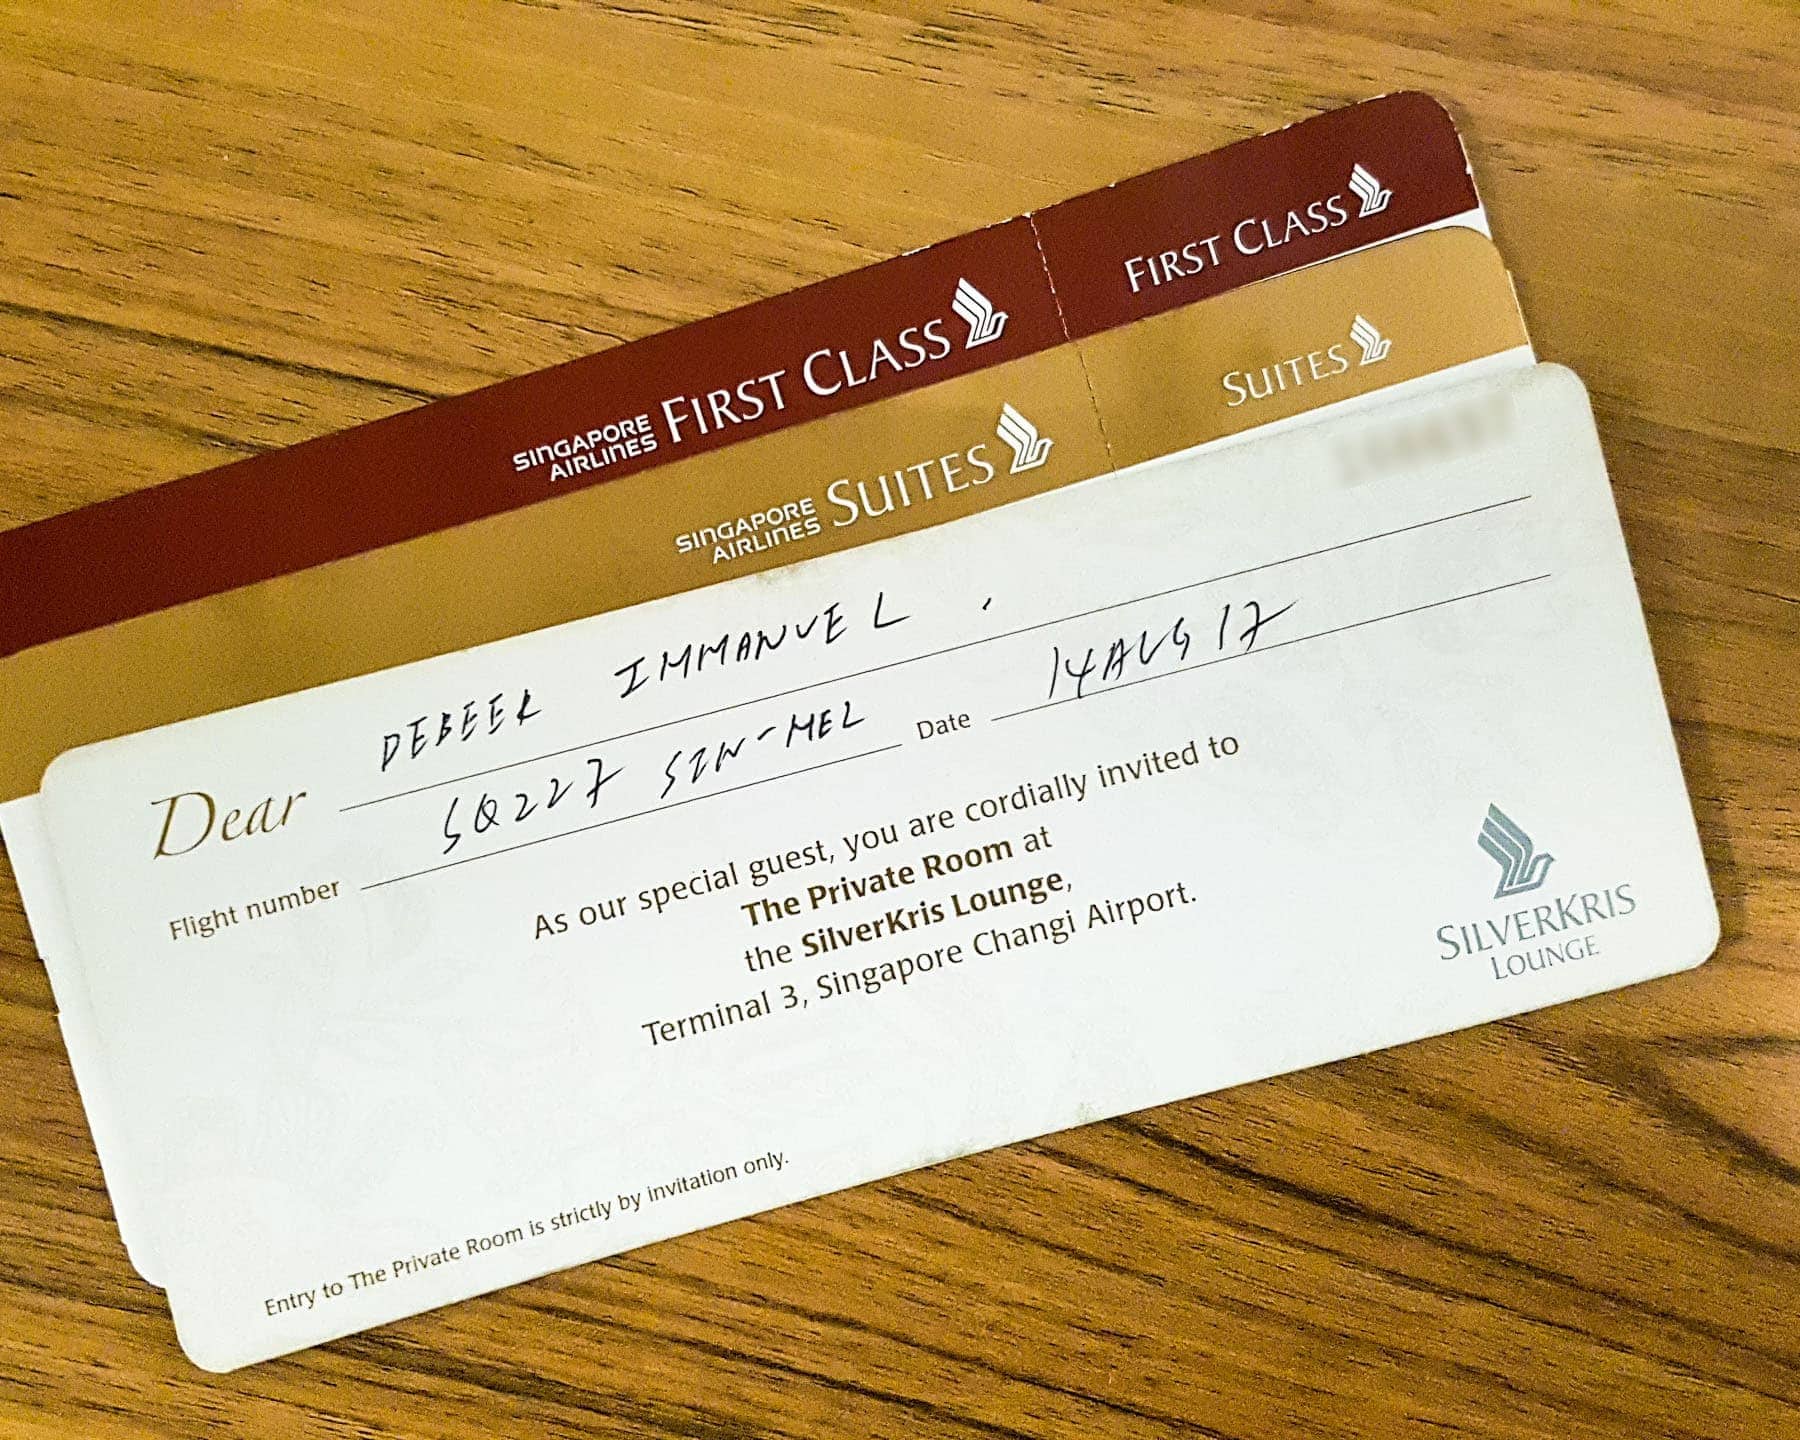 SQ first class suites ticket